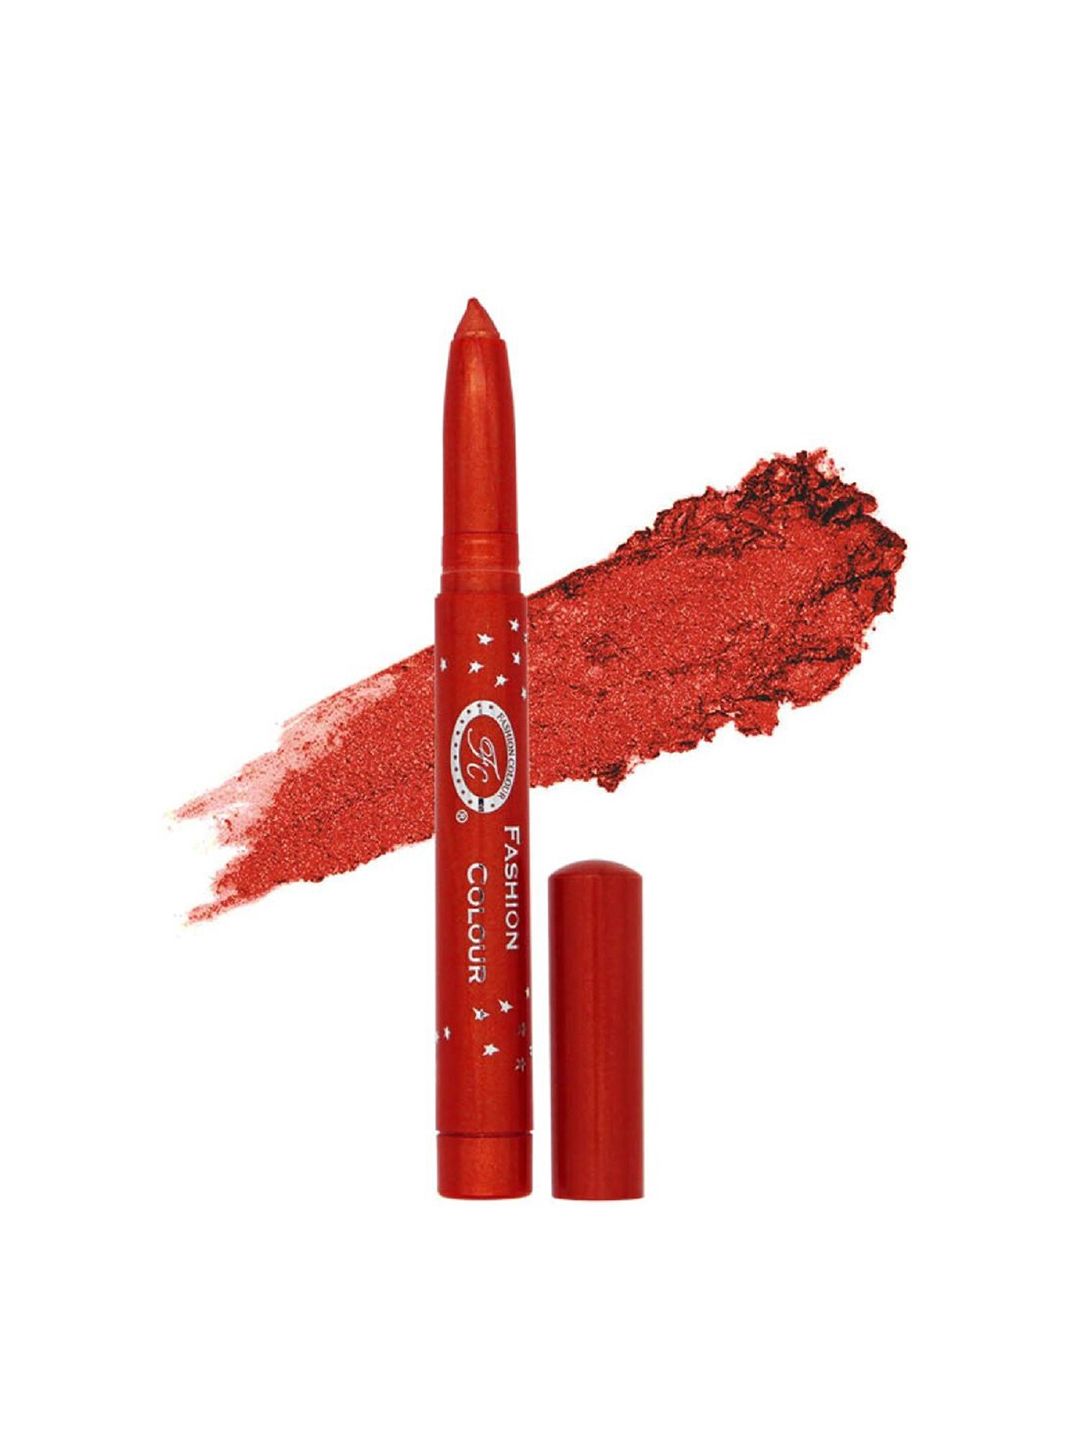 Fashion Colour Silky Smooth & Light German Eyeshadow Pencil - Poppy Red 05 Price in India